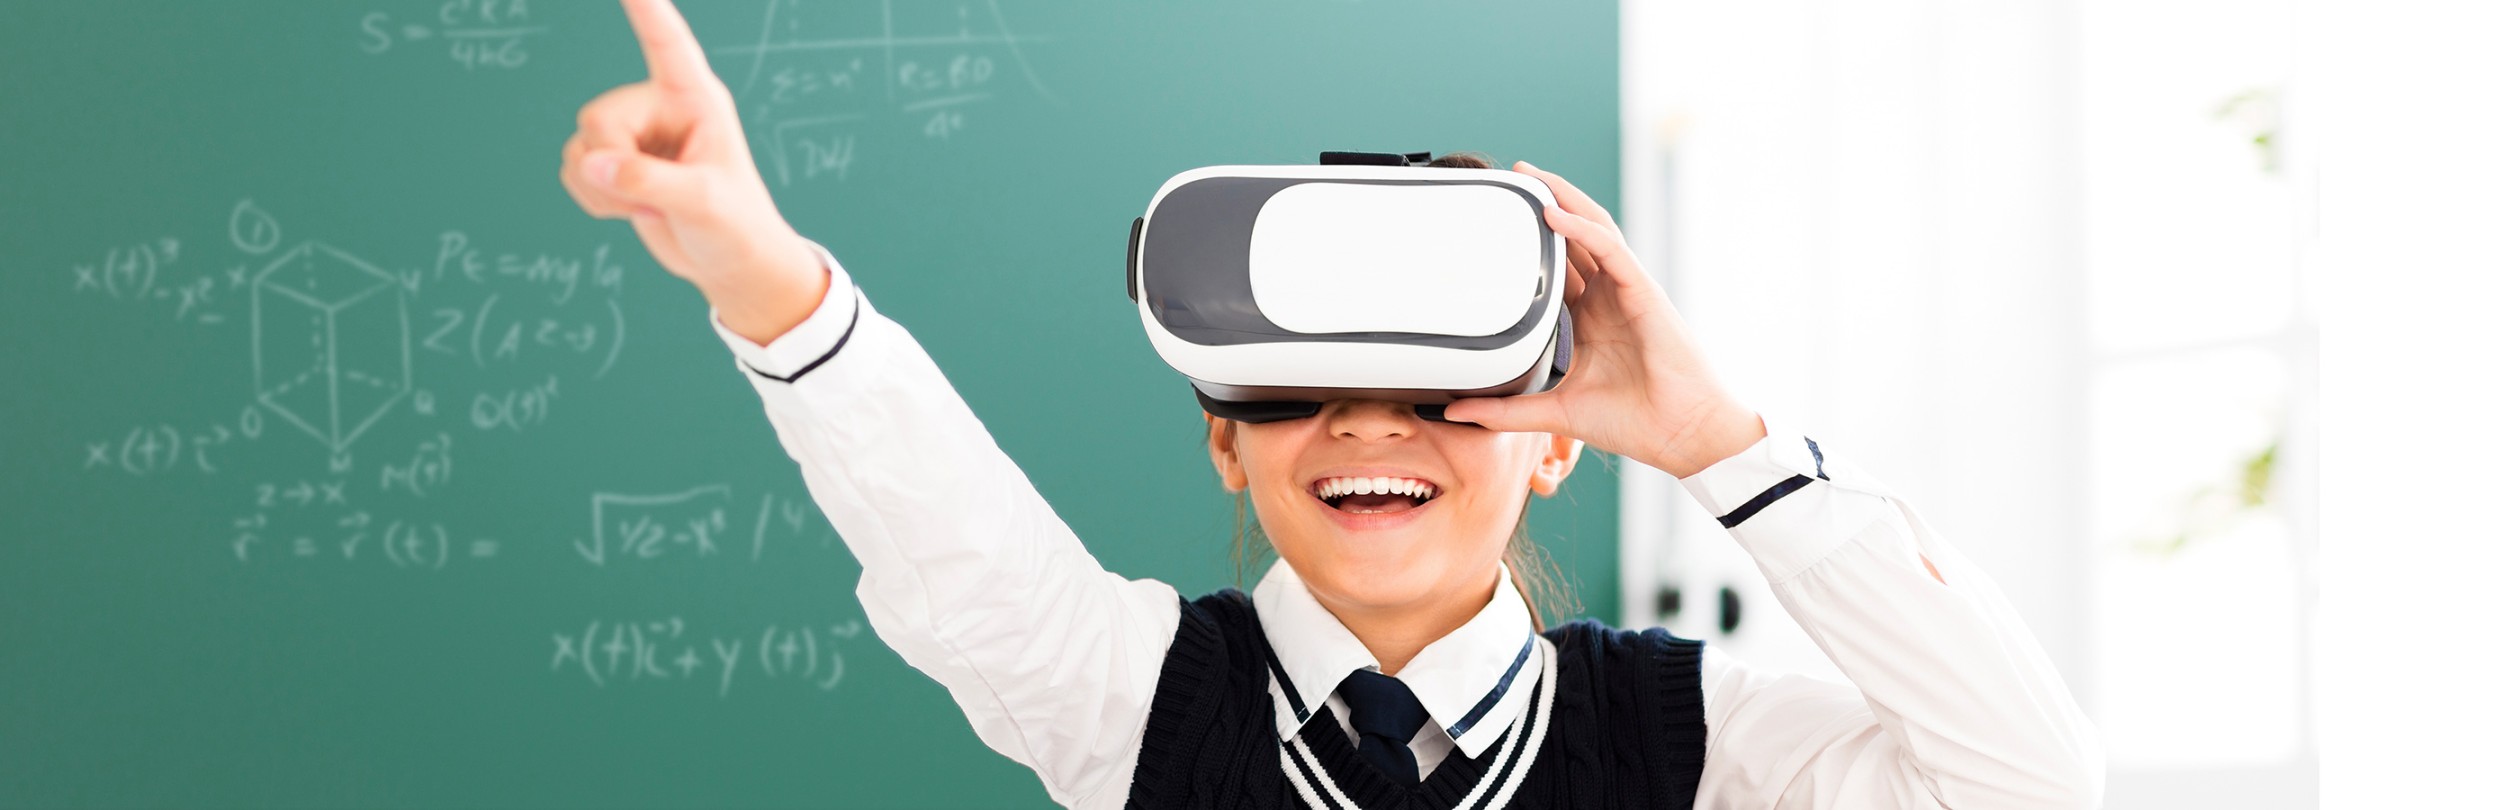 Digital transformation: the investment opportunities in education